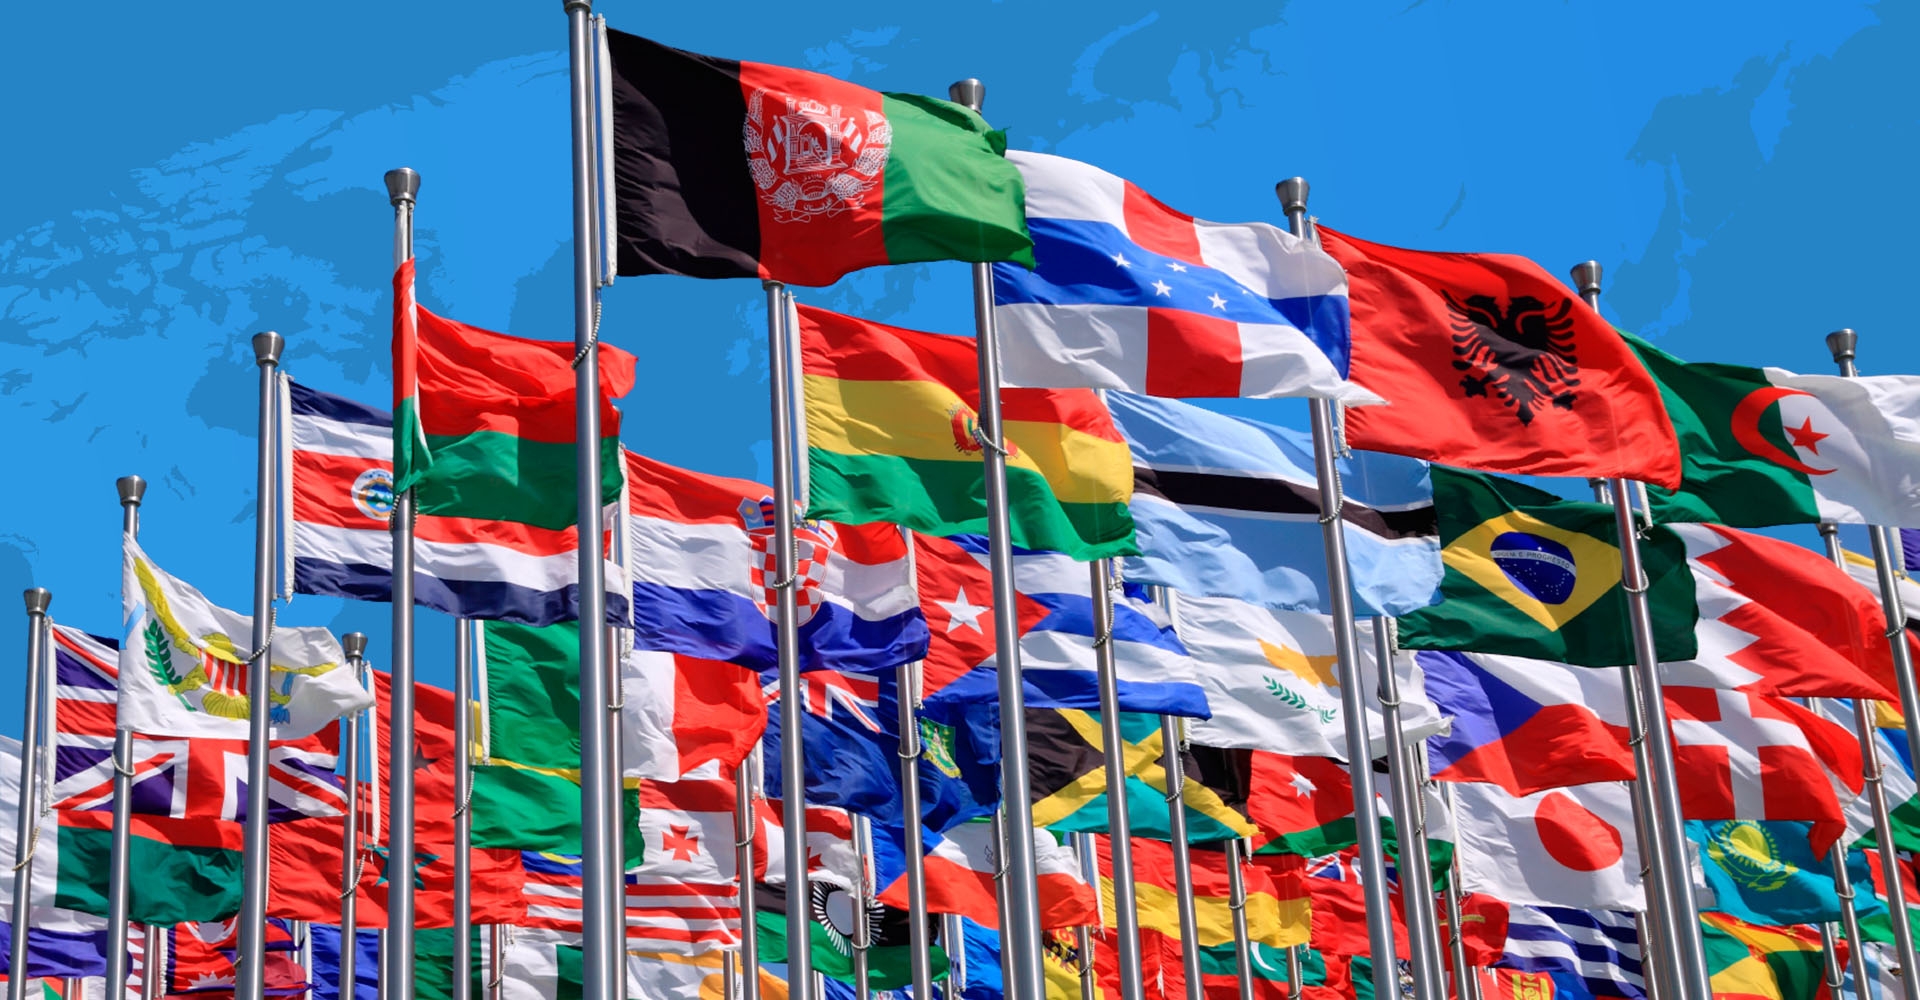 Flags of different countries from all over the world